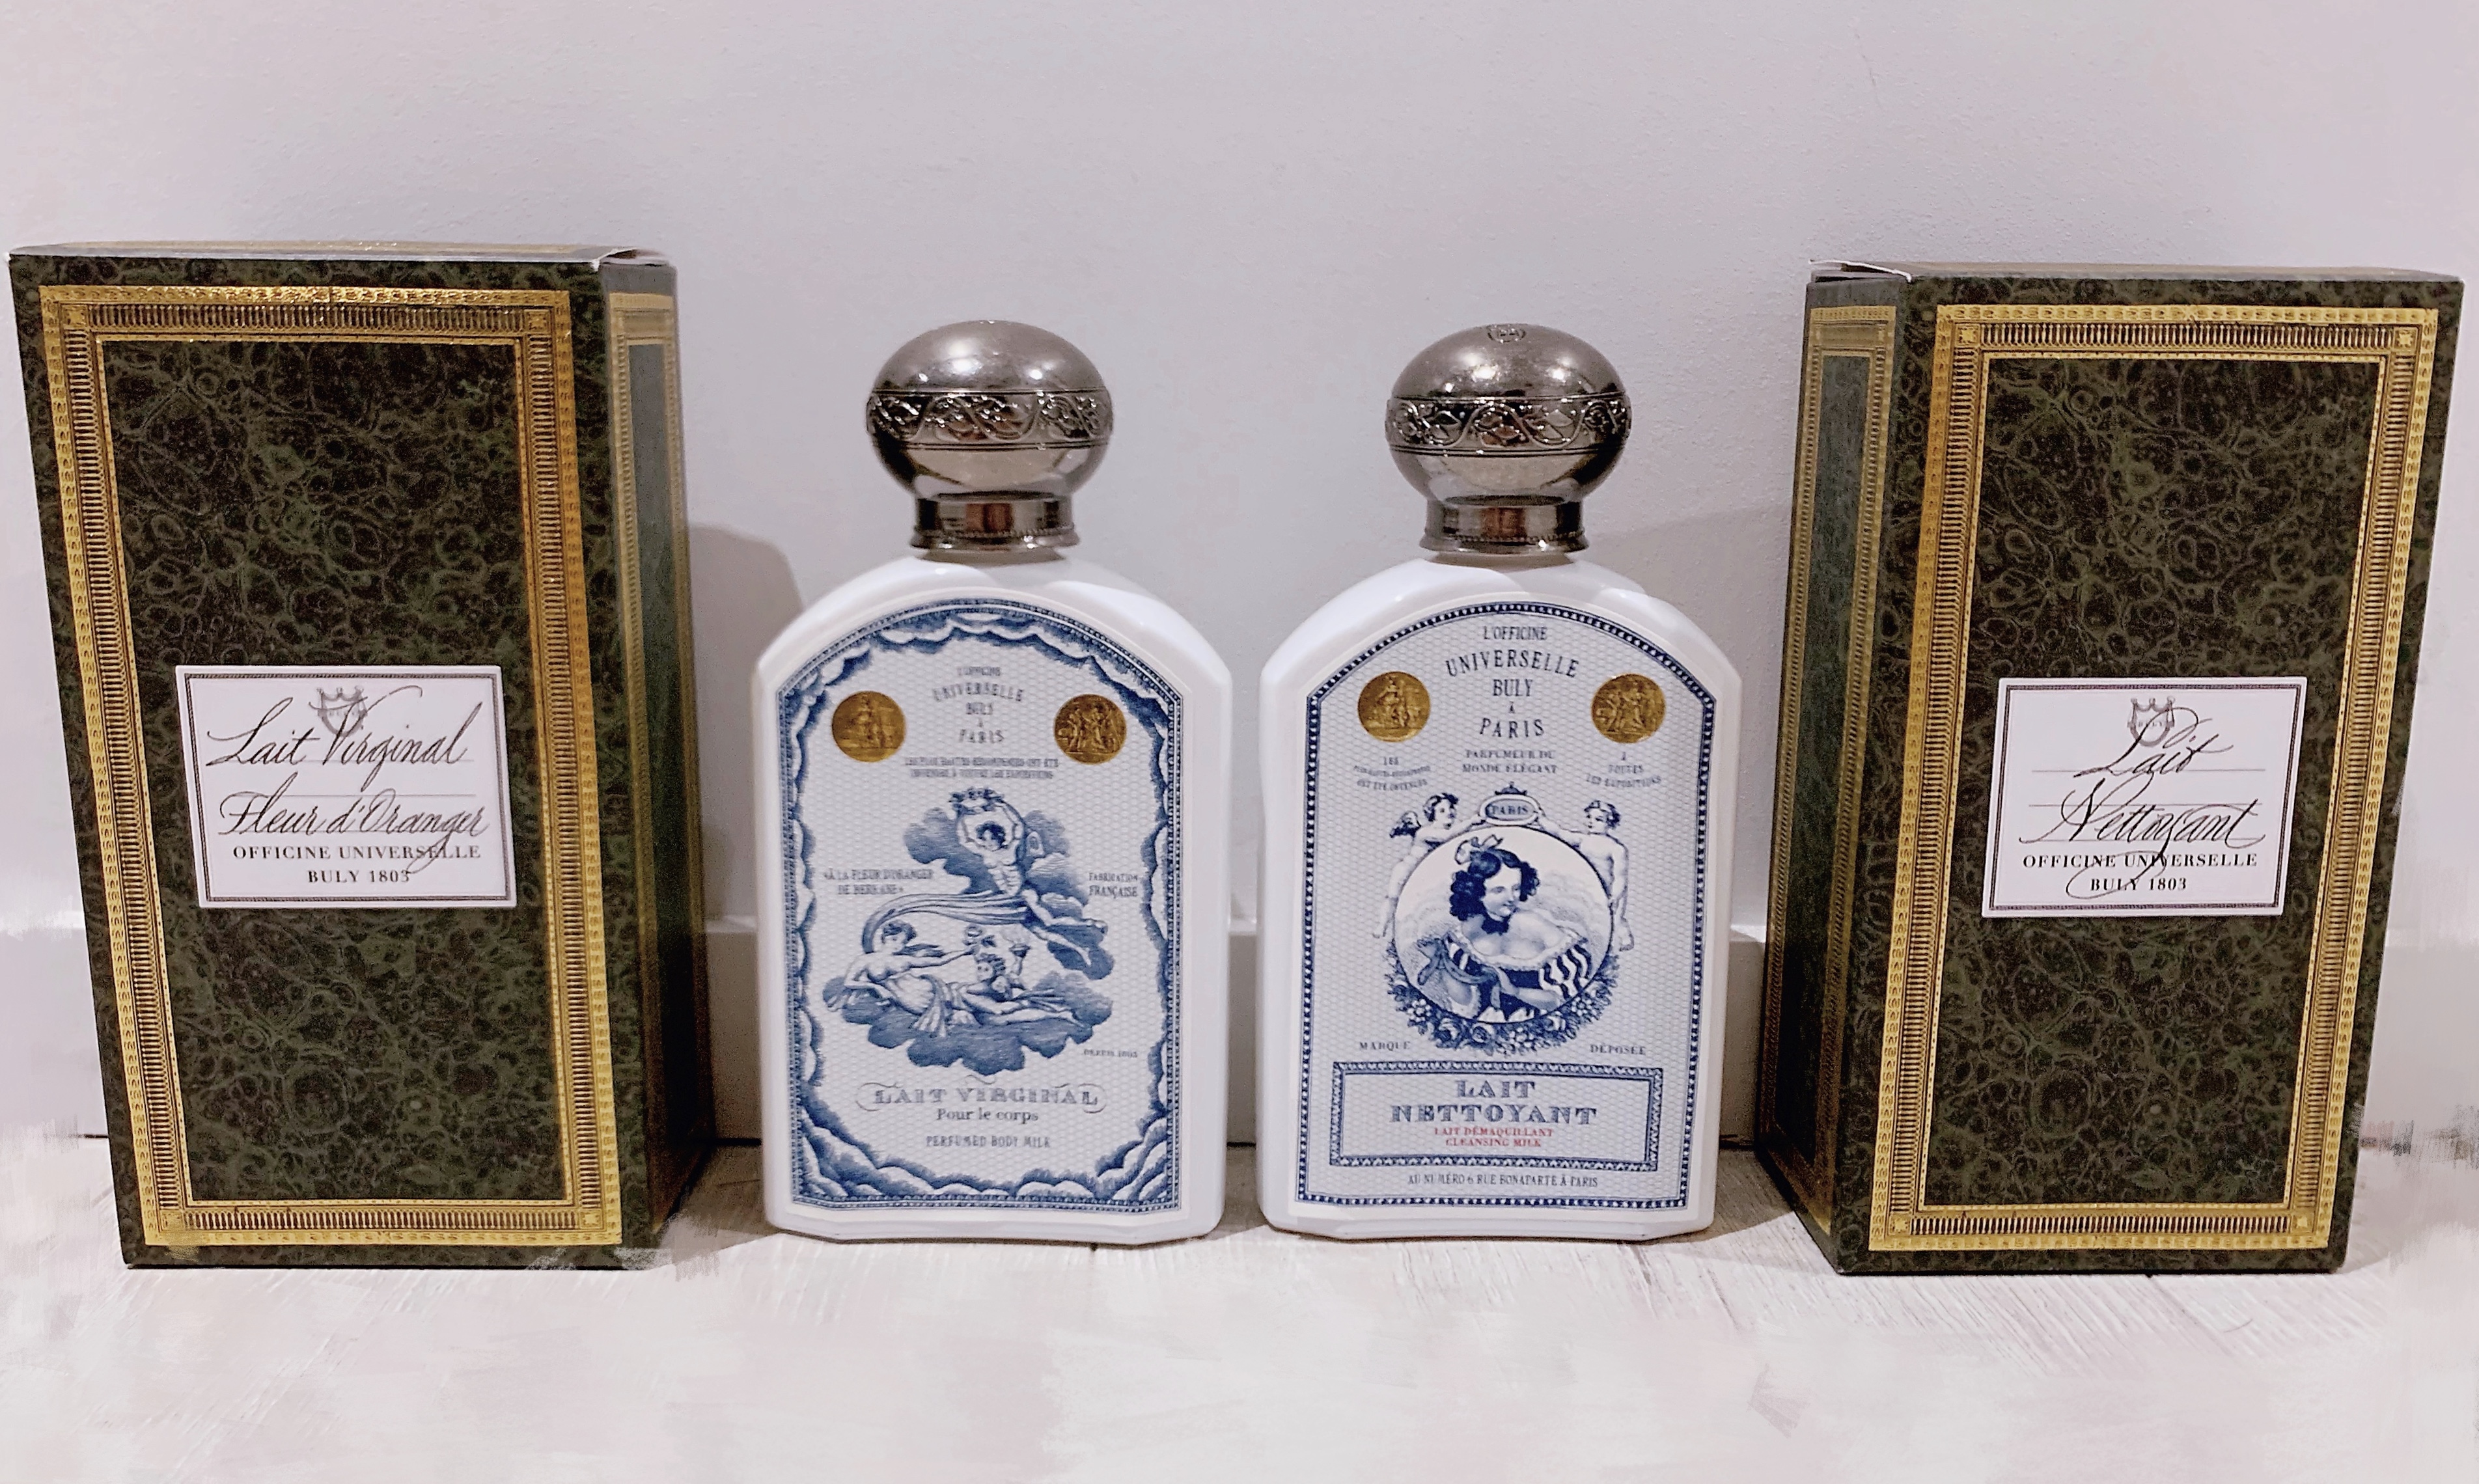 The Best Products From French Apothecary Brand Buly 1803